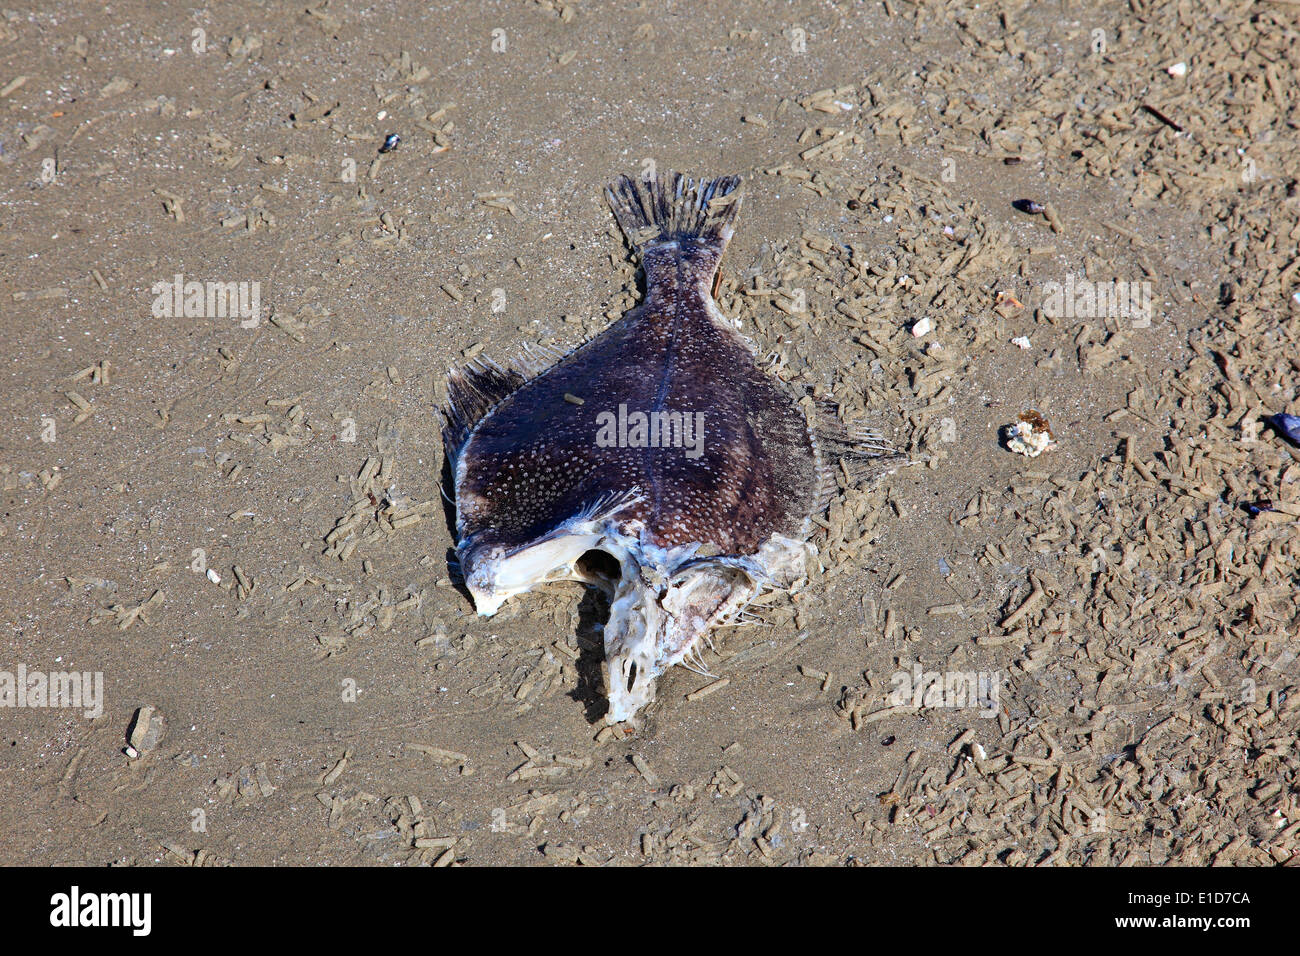 Small halibut washed up on long beach. Head has been eaten by predators Stock Photo